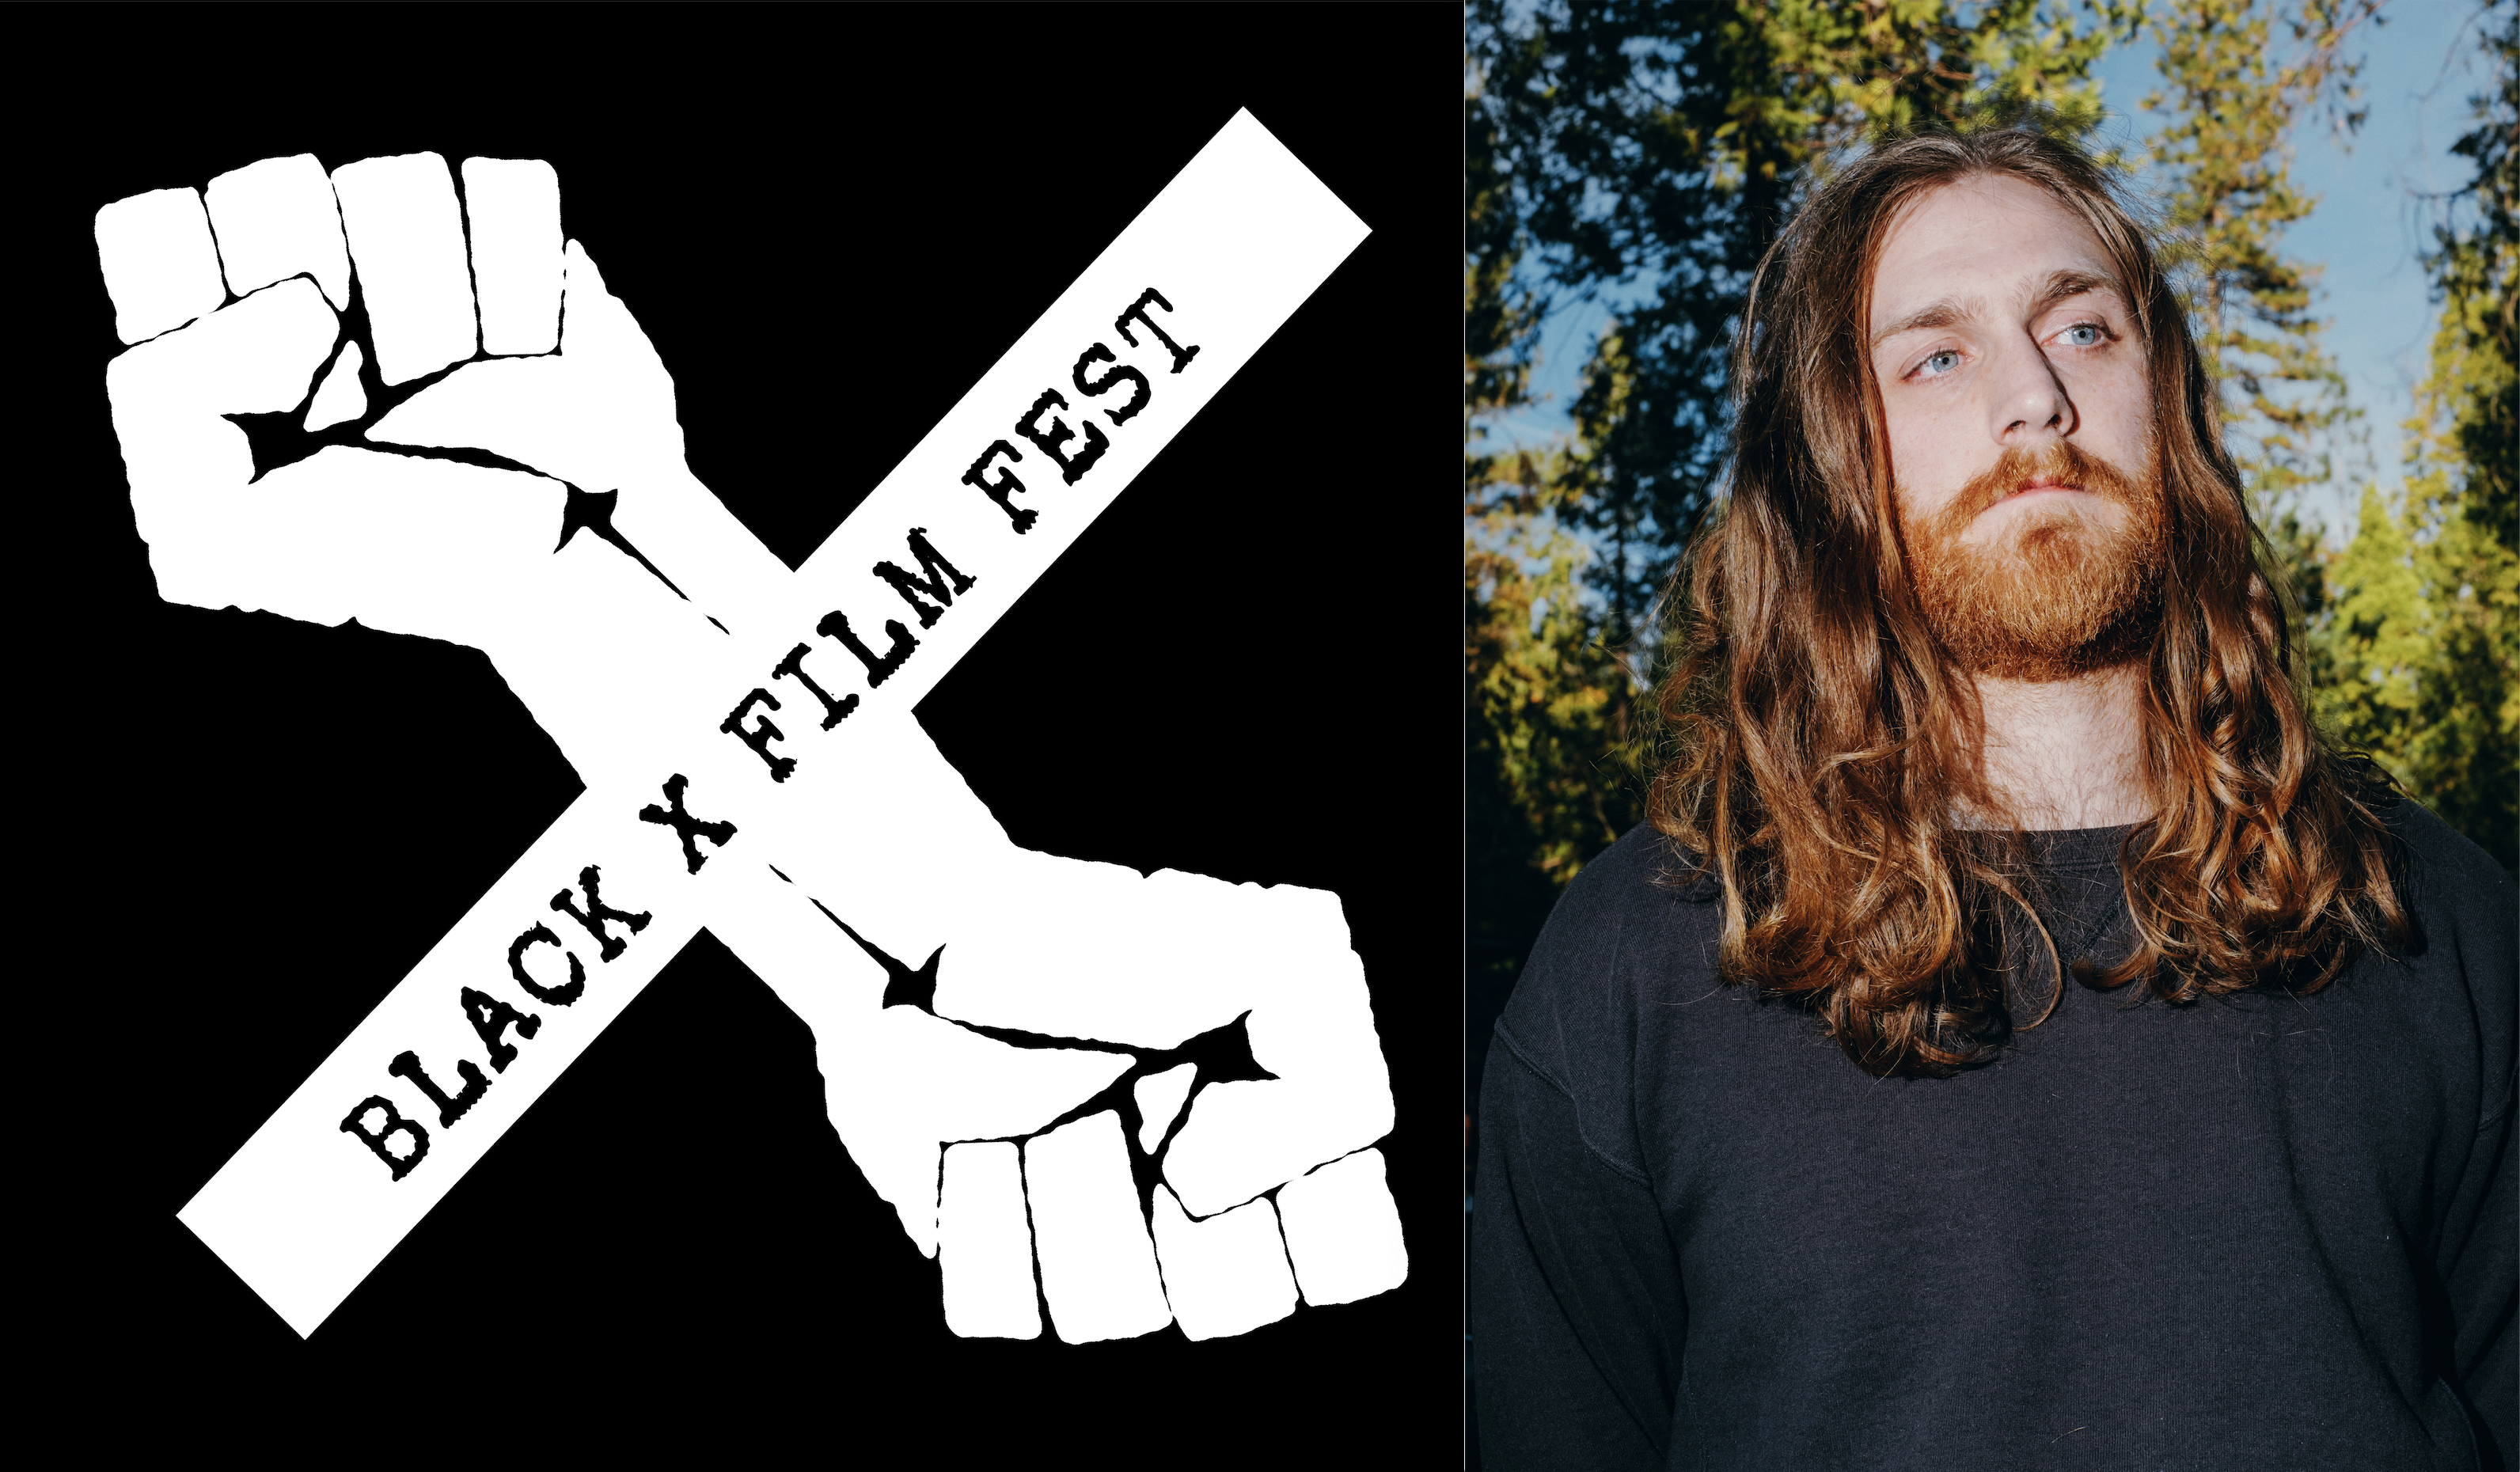 Two images: the logo of the Black X Film Festival which is a cross shape, one line of the cross is two fists. On the right is a photo of Zach Gallagher with long red hair